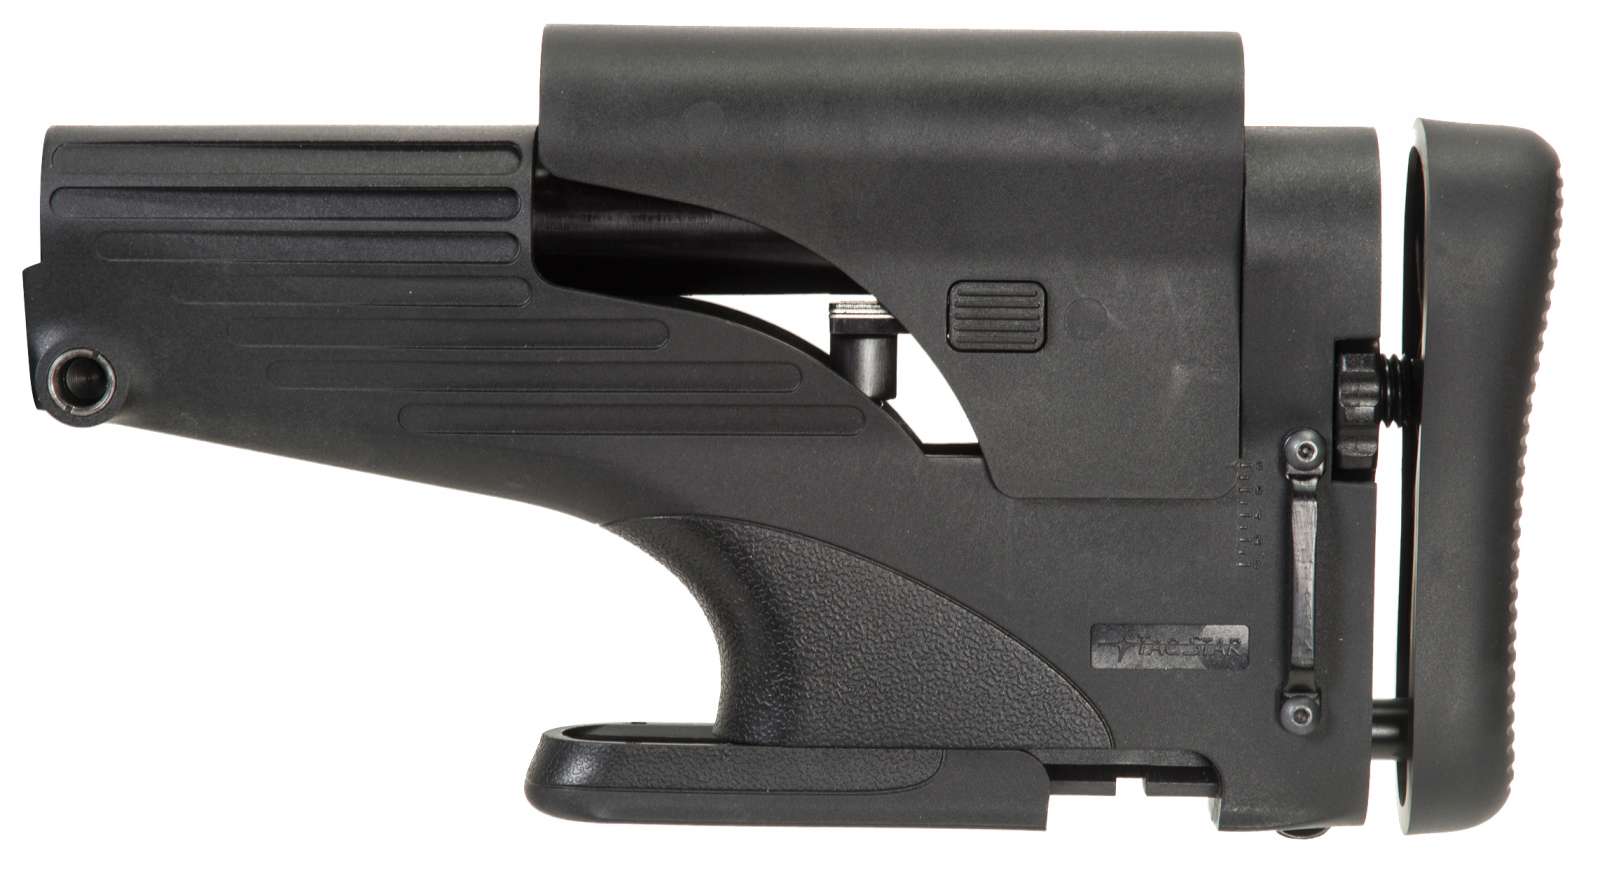 TacStar 1081123 AMRS AR15 Rifle Black Carters Country